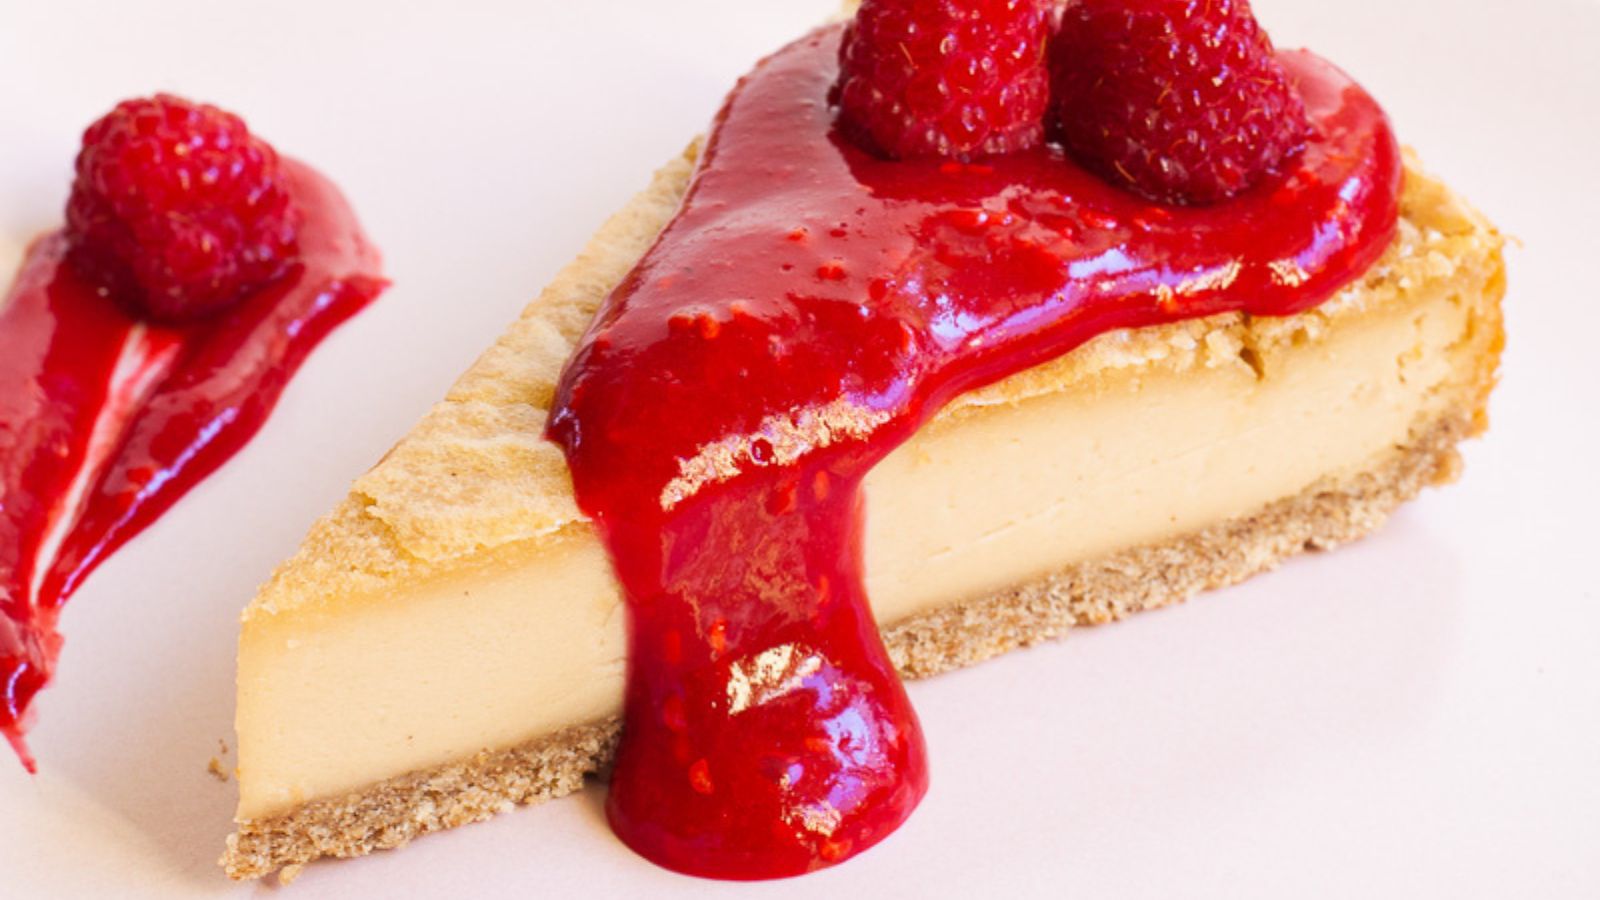 <p>This <a href="https://mypureplants.com/vegan-cheesecake-baked/">vegan New York-style cheesecake</a> is a dreamy dessert with a velvety texture and a tangy flavor that perfectly complements the bright raspberry sauce. Made with only five whole food ingredients, it’s oil-free and gluten-free, making it a healthier treat without sacrificing taste.</p> <p><strong>Recipe: <a href="https://mypureplants.com/vegan-cheesecake-baked/">baked vegan cheesecake</a></strong></p>